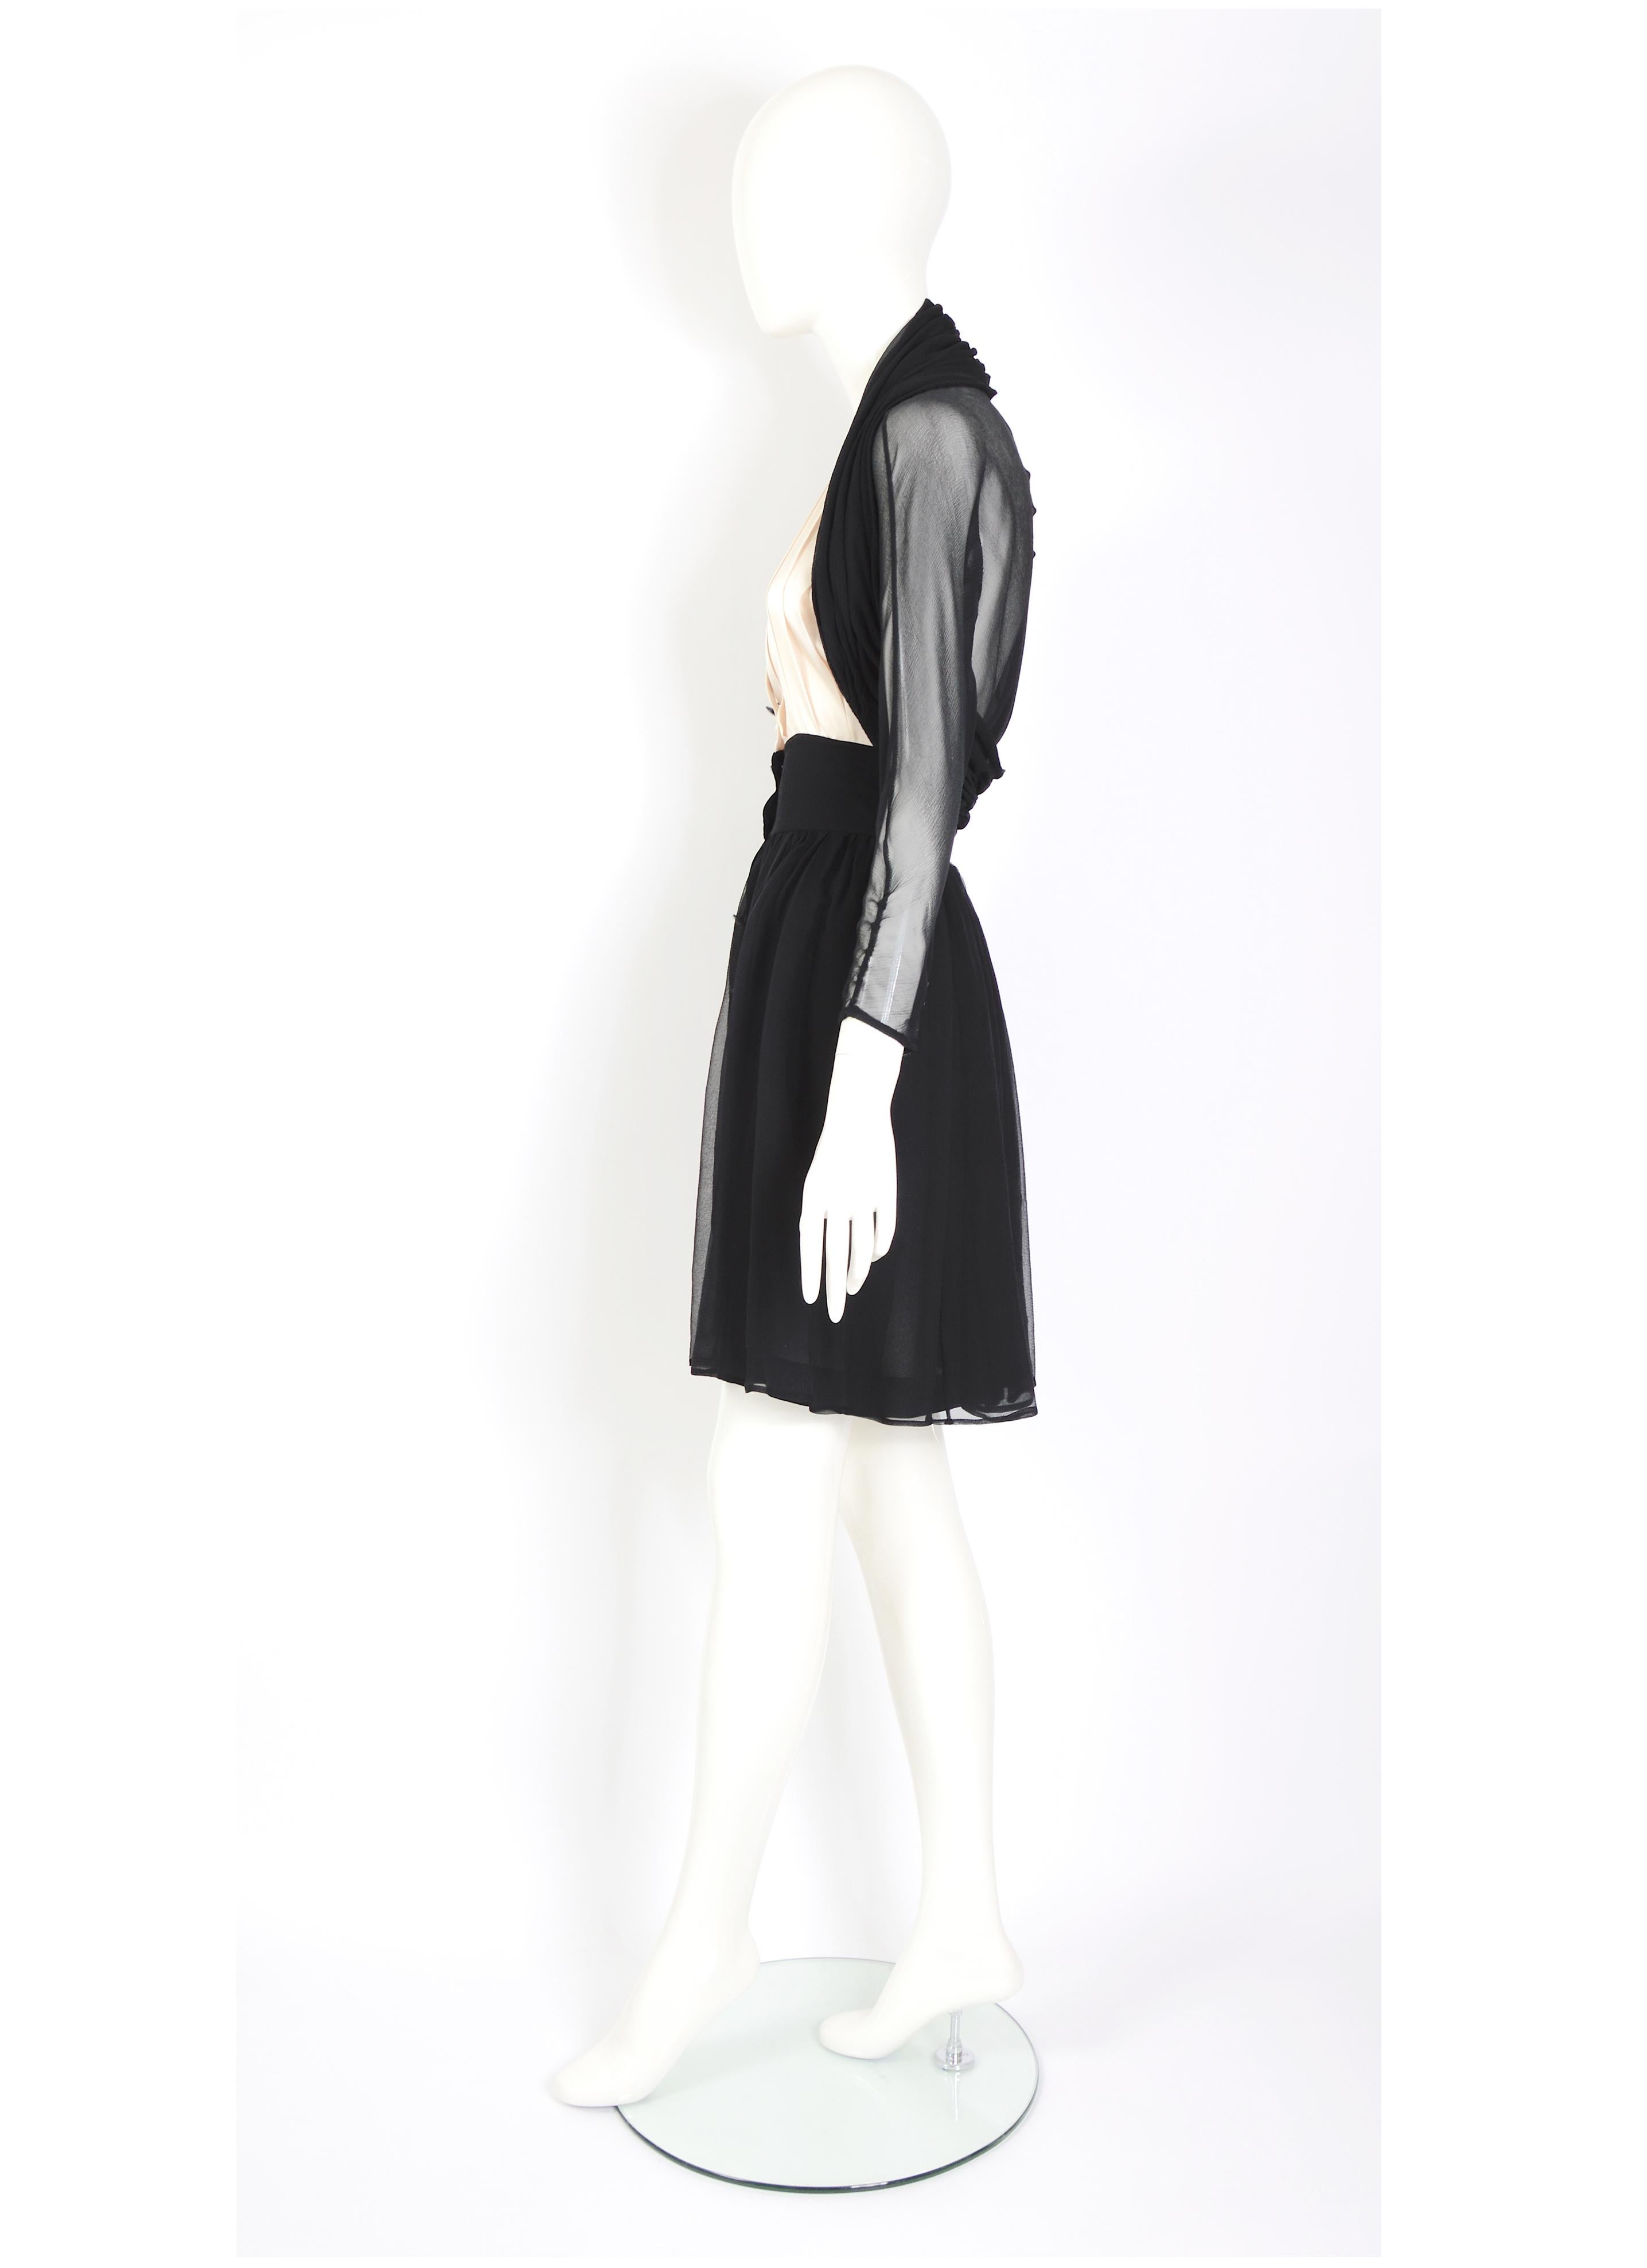 Women's Karl Lagerfeld documented vintage Fall 1988/89 collection black silk dress